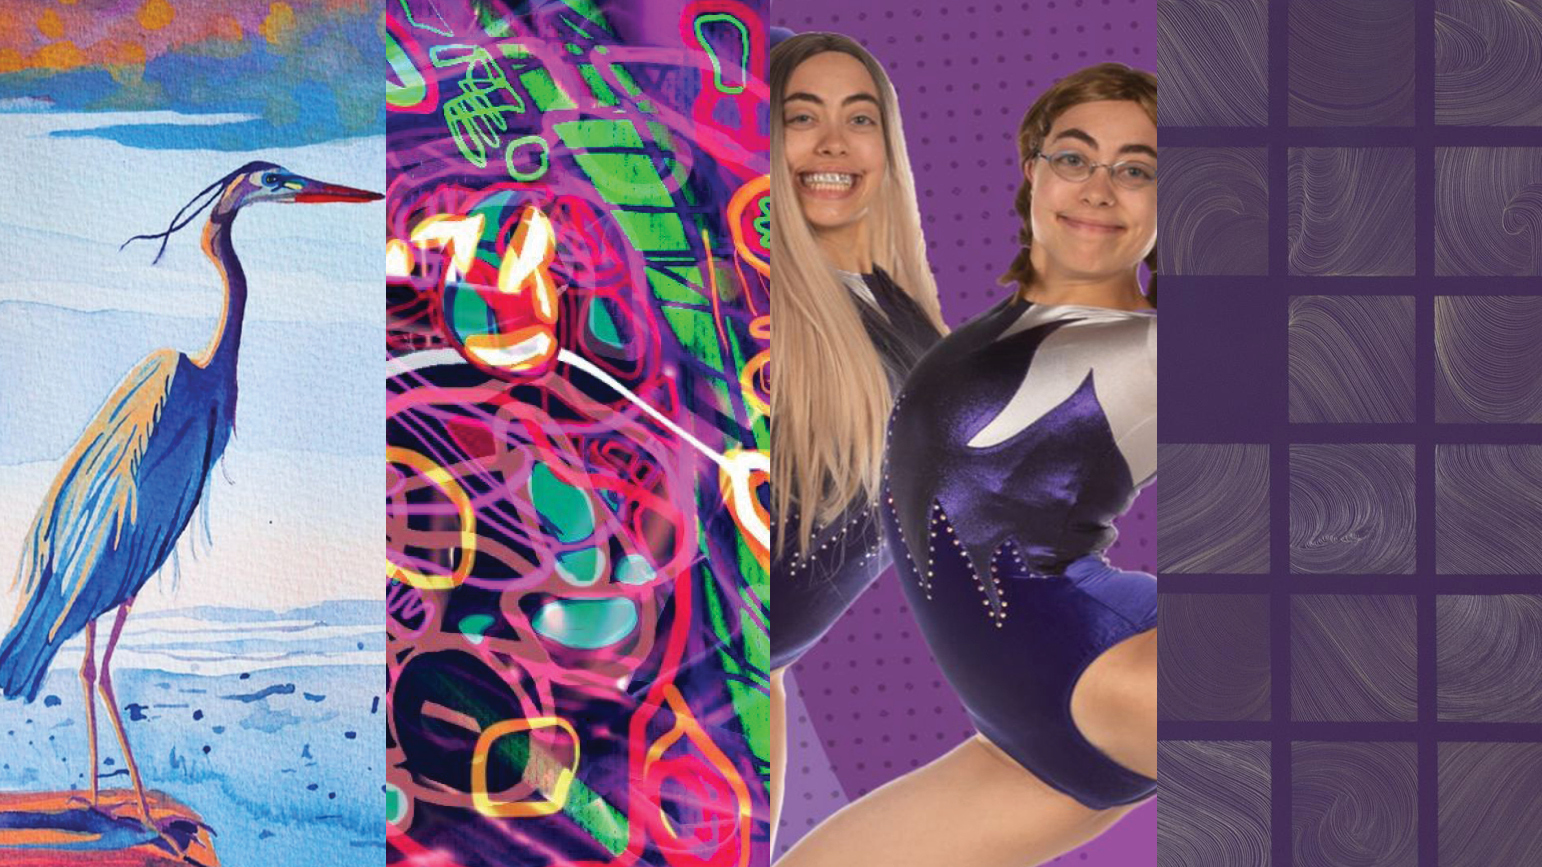 Four artworks: painting of a crane; abstract digital work; photograph of two gymnasts (the same person in two different costumes); abstract gridded work